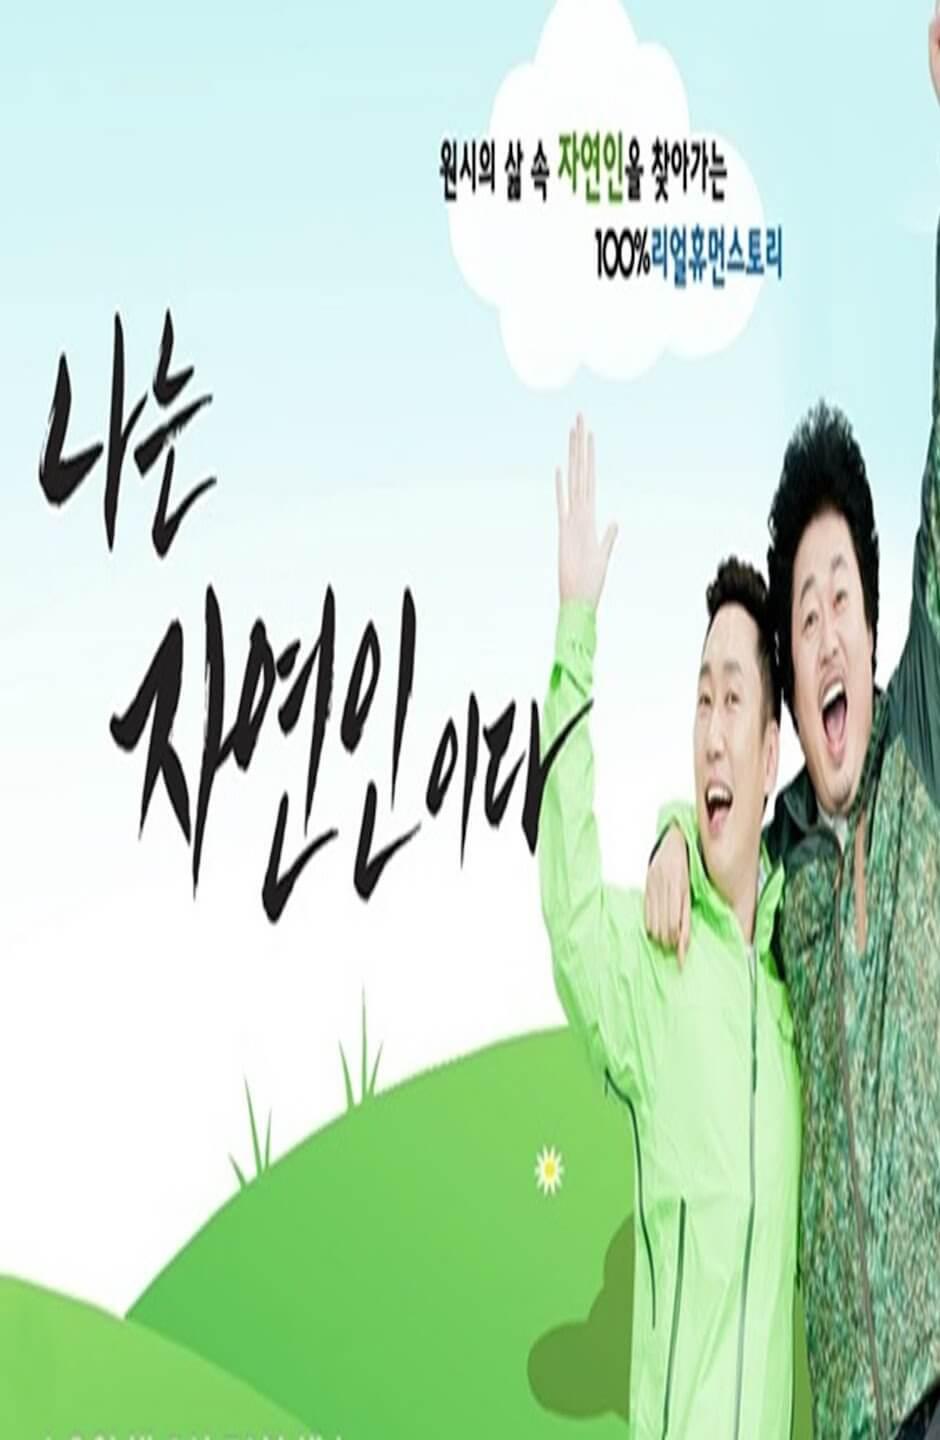 TV ratings for I Am A Natural Person (나는 자연인이다) in South Korea. MBN TV series